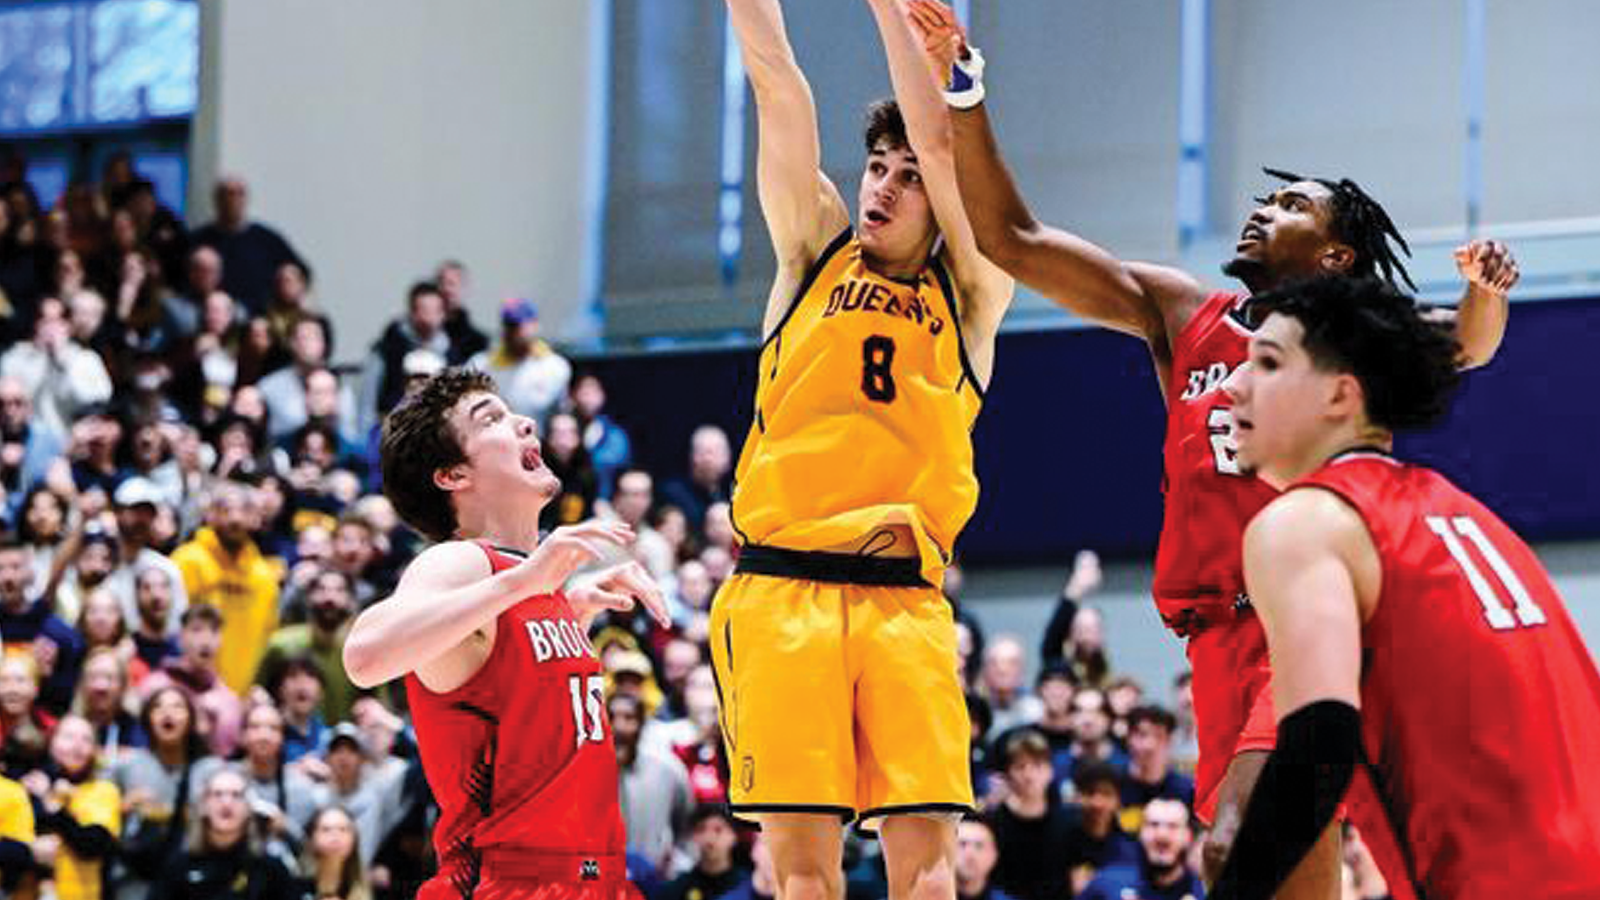 Queen's men's basketball player Cole Syllas shooting the ball over Brock defenders during a game